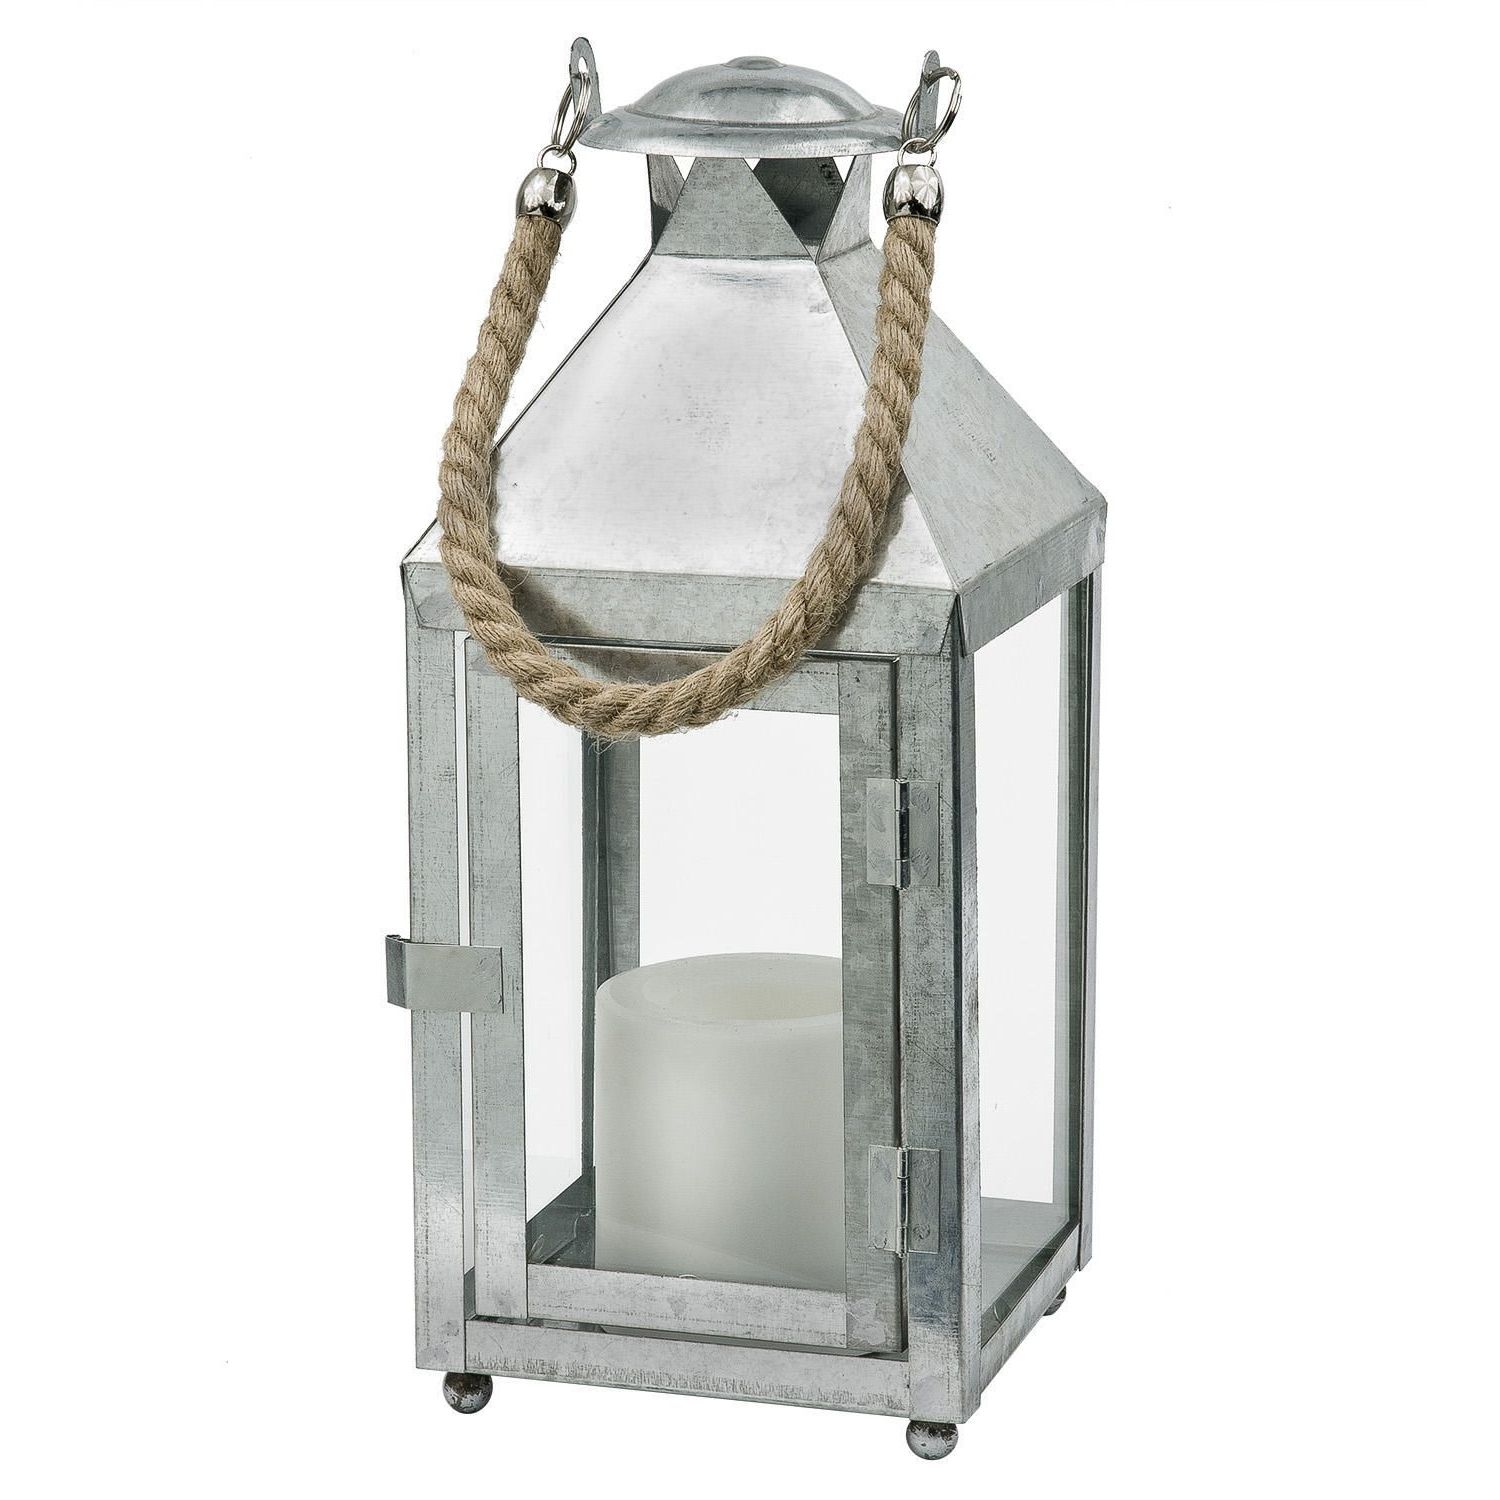 Trendy Walmart Outdoor Lanterns Within Paradise Gl28672mgv Metal Lantern And Flameless Outdoor Candle (View 13 of 20)